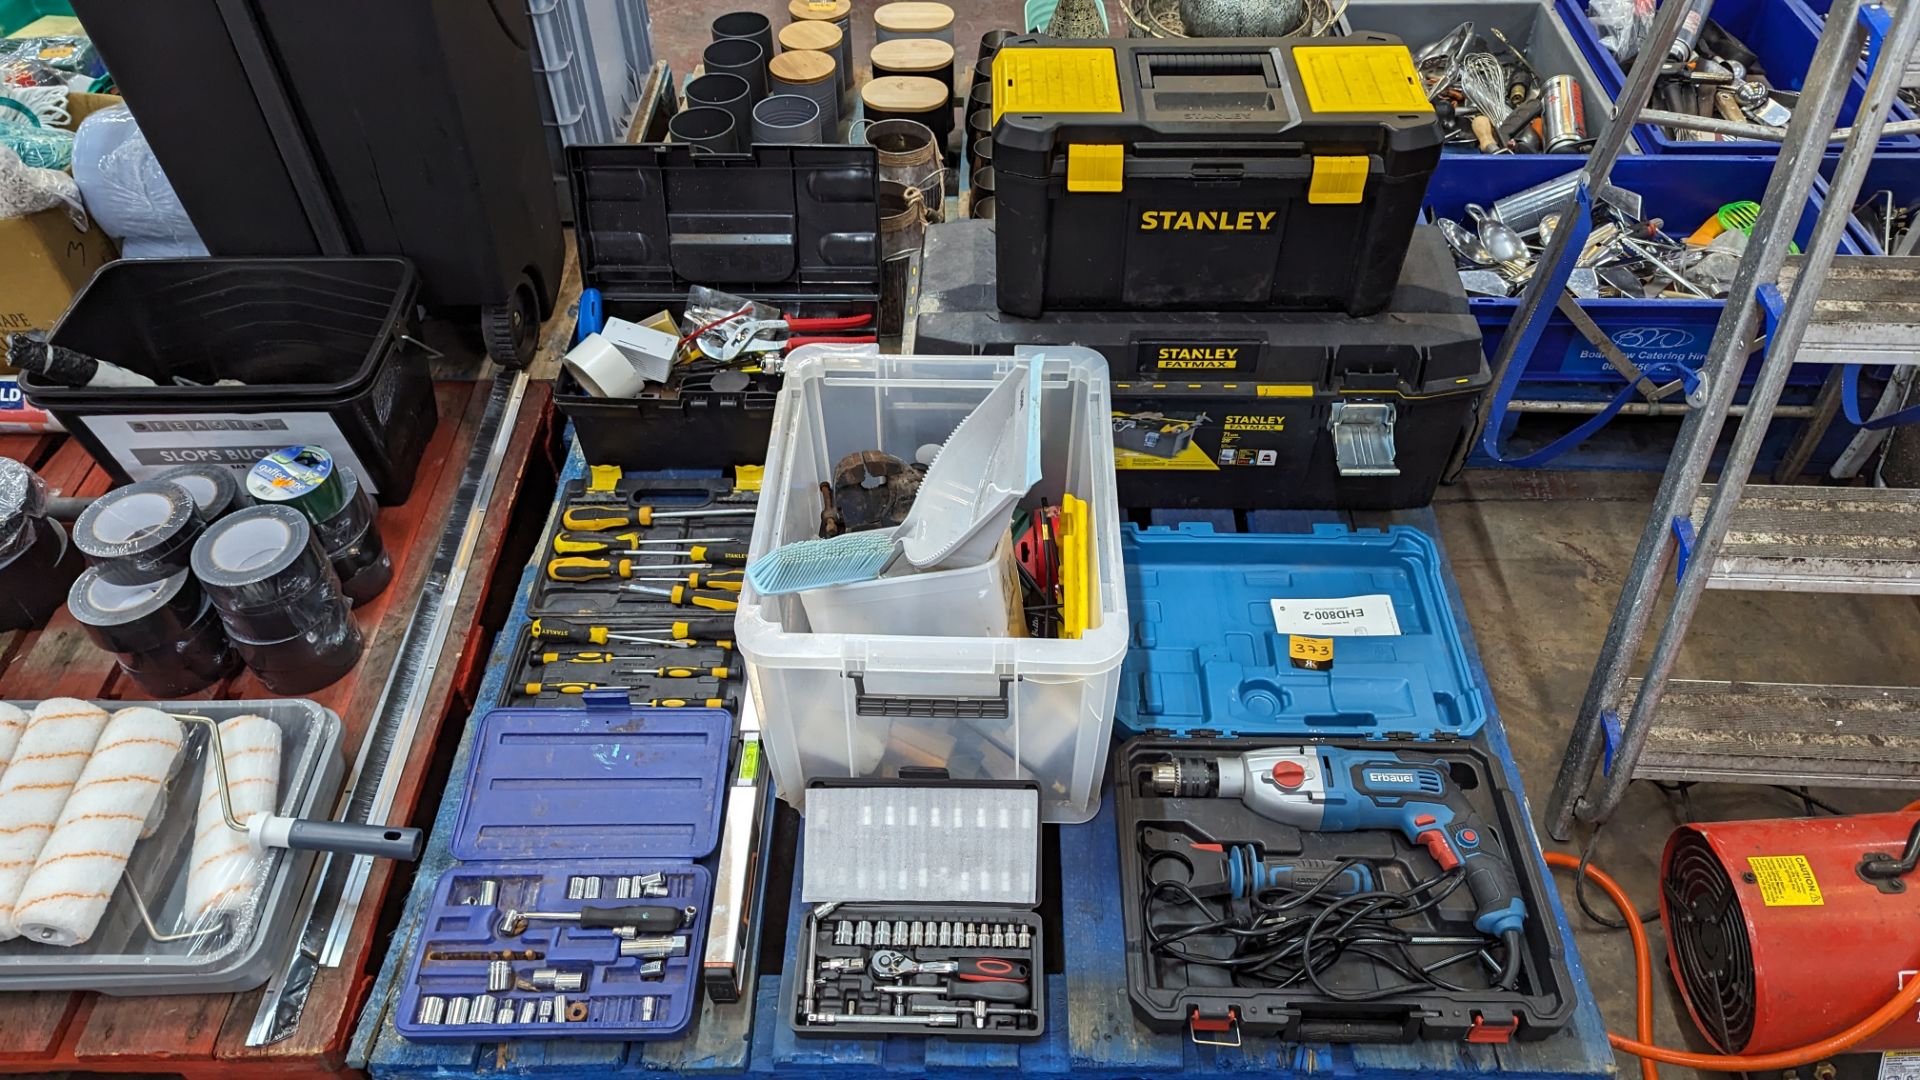 The contents of a pallet of tools including 2 toolboxes plus Erbauer drill, screwdriver sets, socket